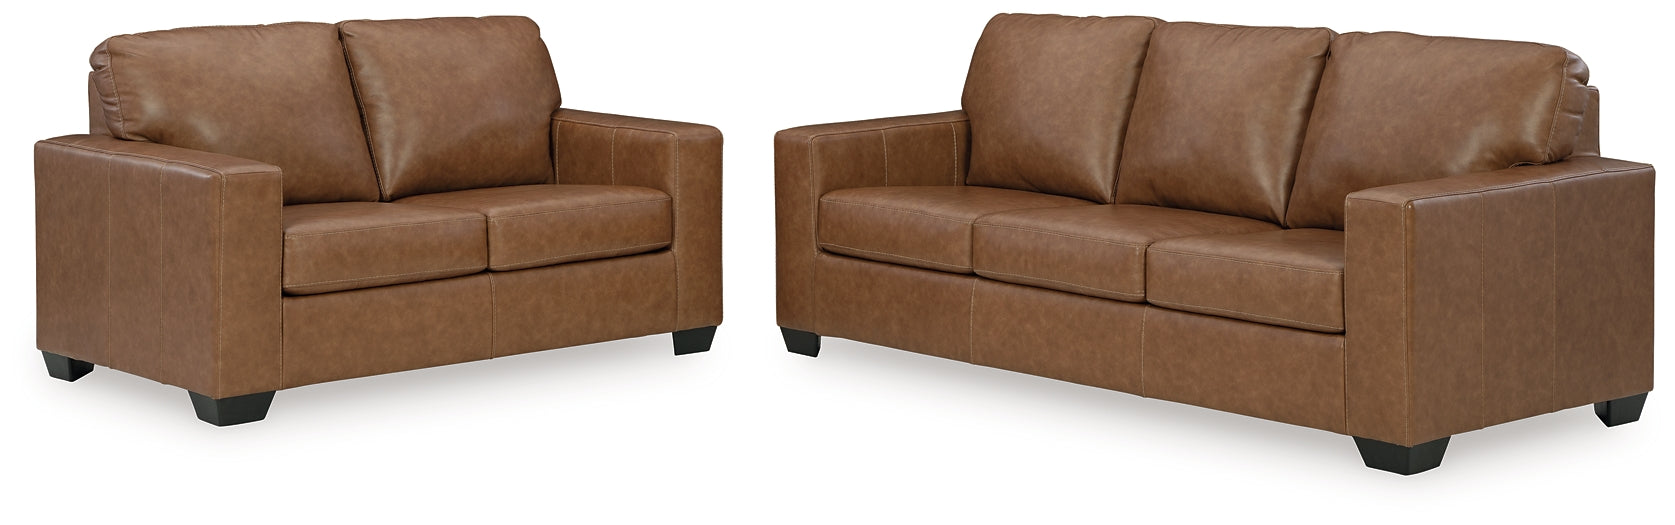 Bolsena Sofa and Loveseat at Walker Mattress and Furniture Locations in Cedar Park and Belton TX.